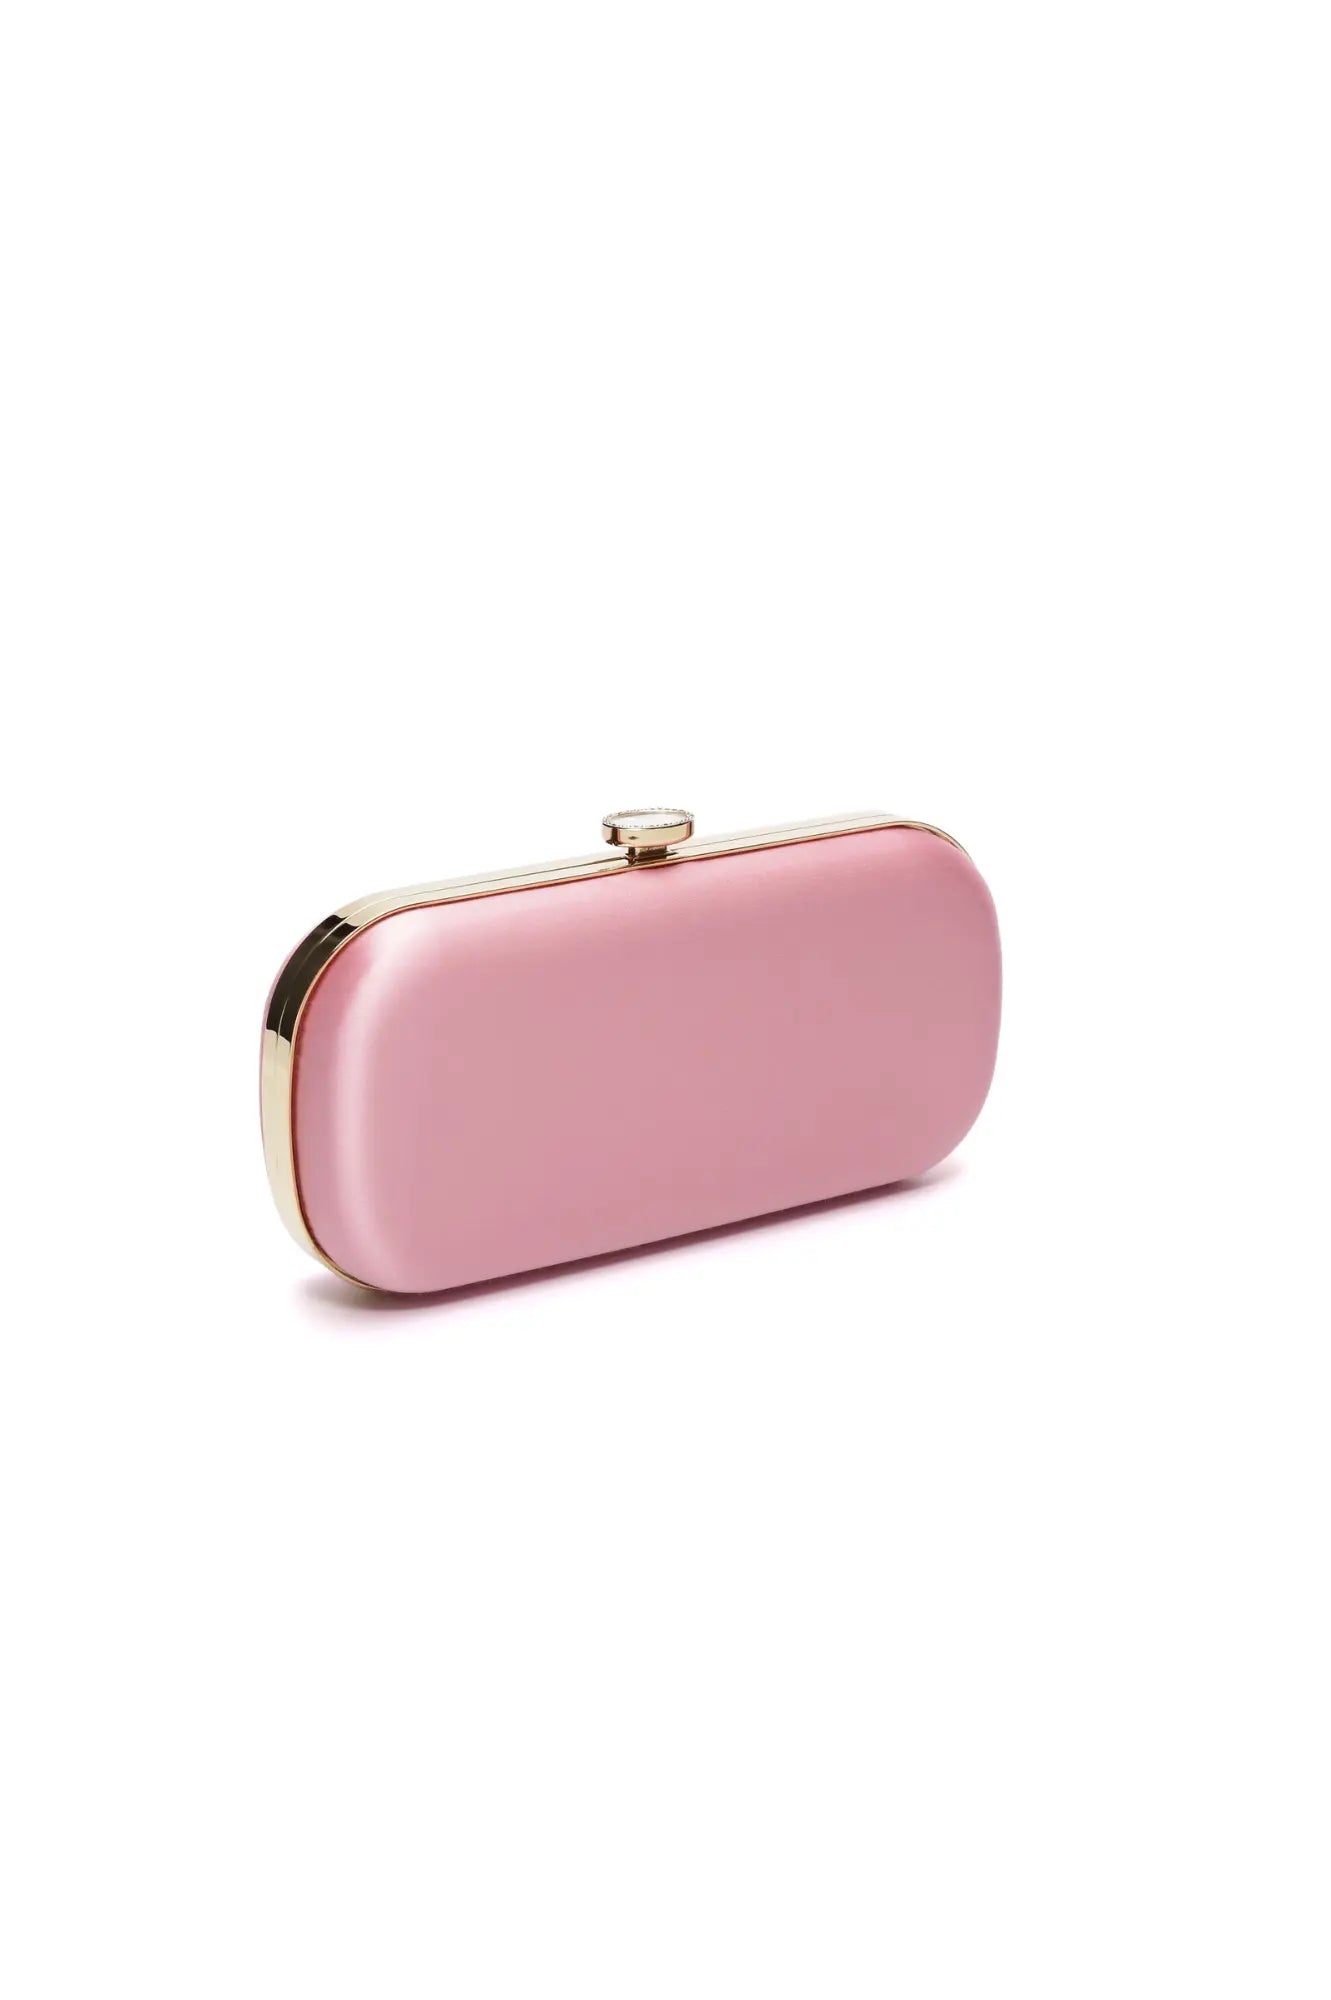 Pink Bella Clutch purse with gold accents on a white background, crafted from Duchess Satin,
would be replaced with:
 
Bella Rosa Collection Bella Clutch Pink Petite purse with gold accents on a white background, crafted from Duchess Satin.